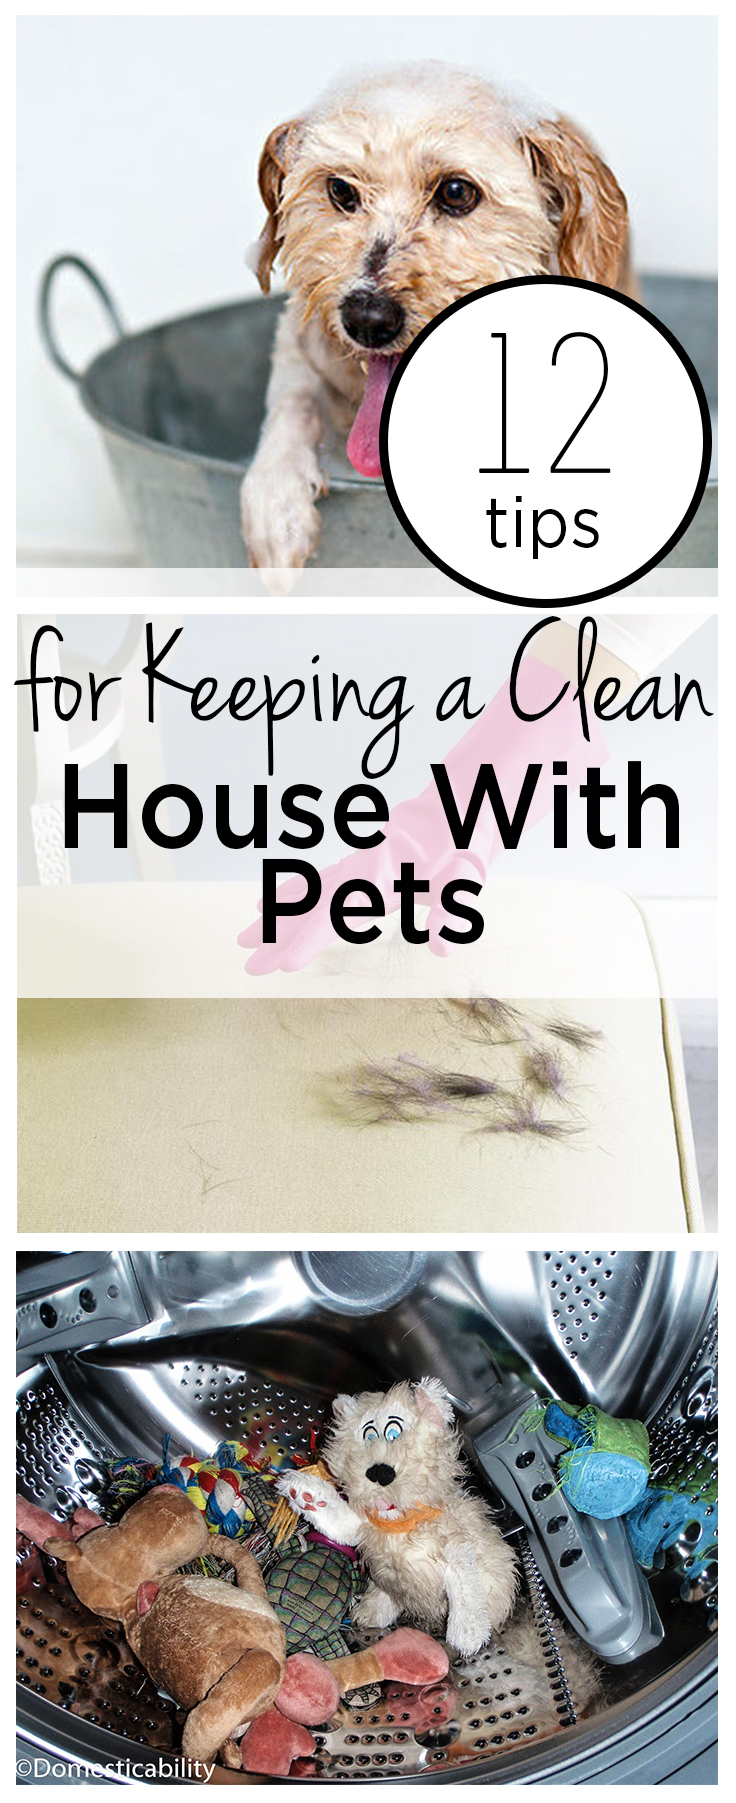 12 Tips for Keeping a Clean House With Pets Wrapped in Rust